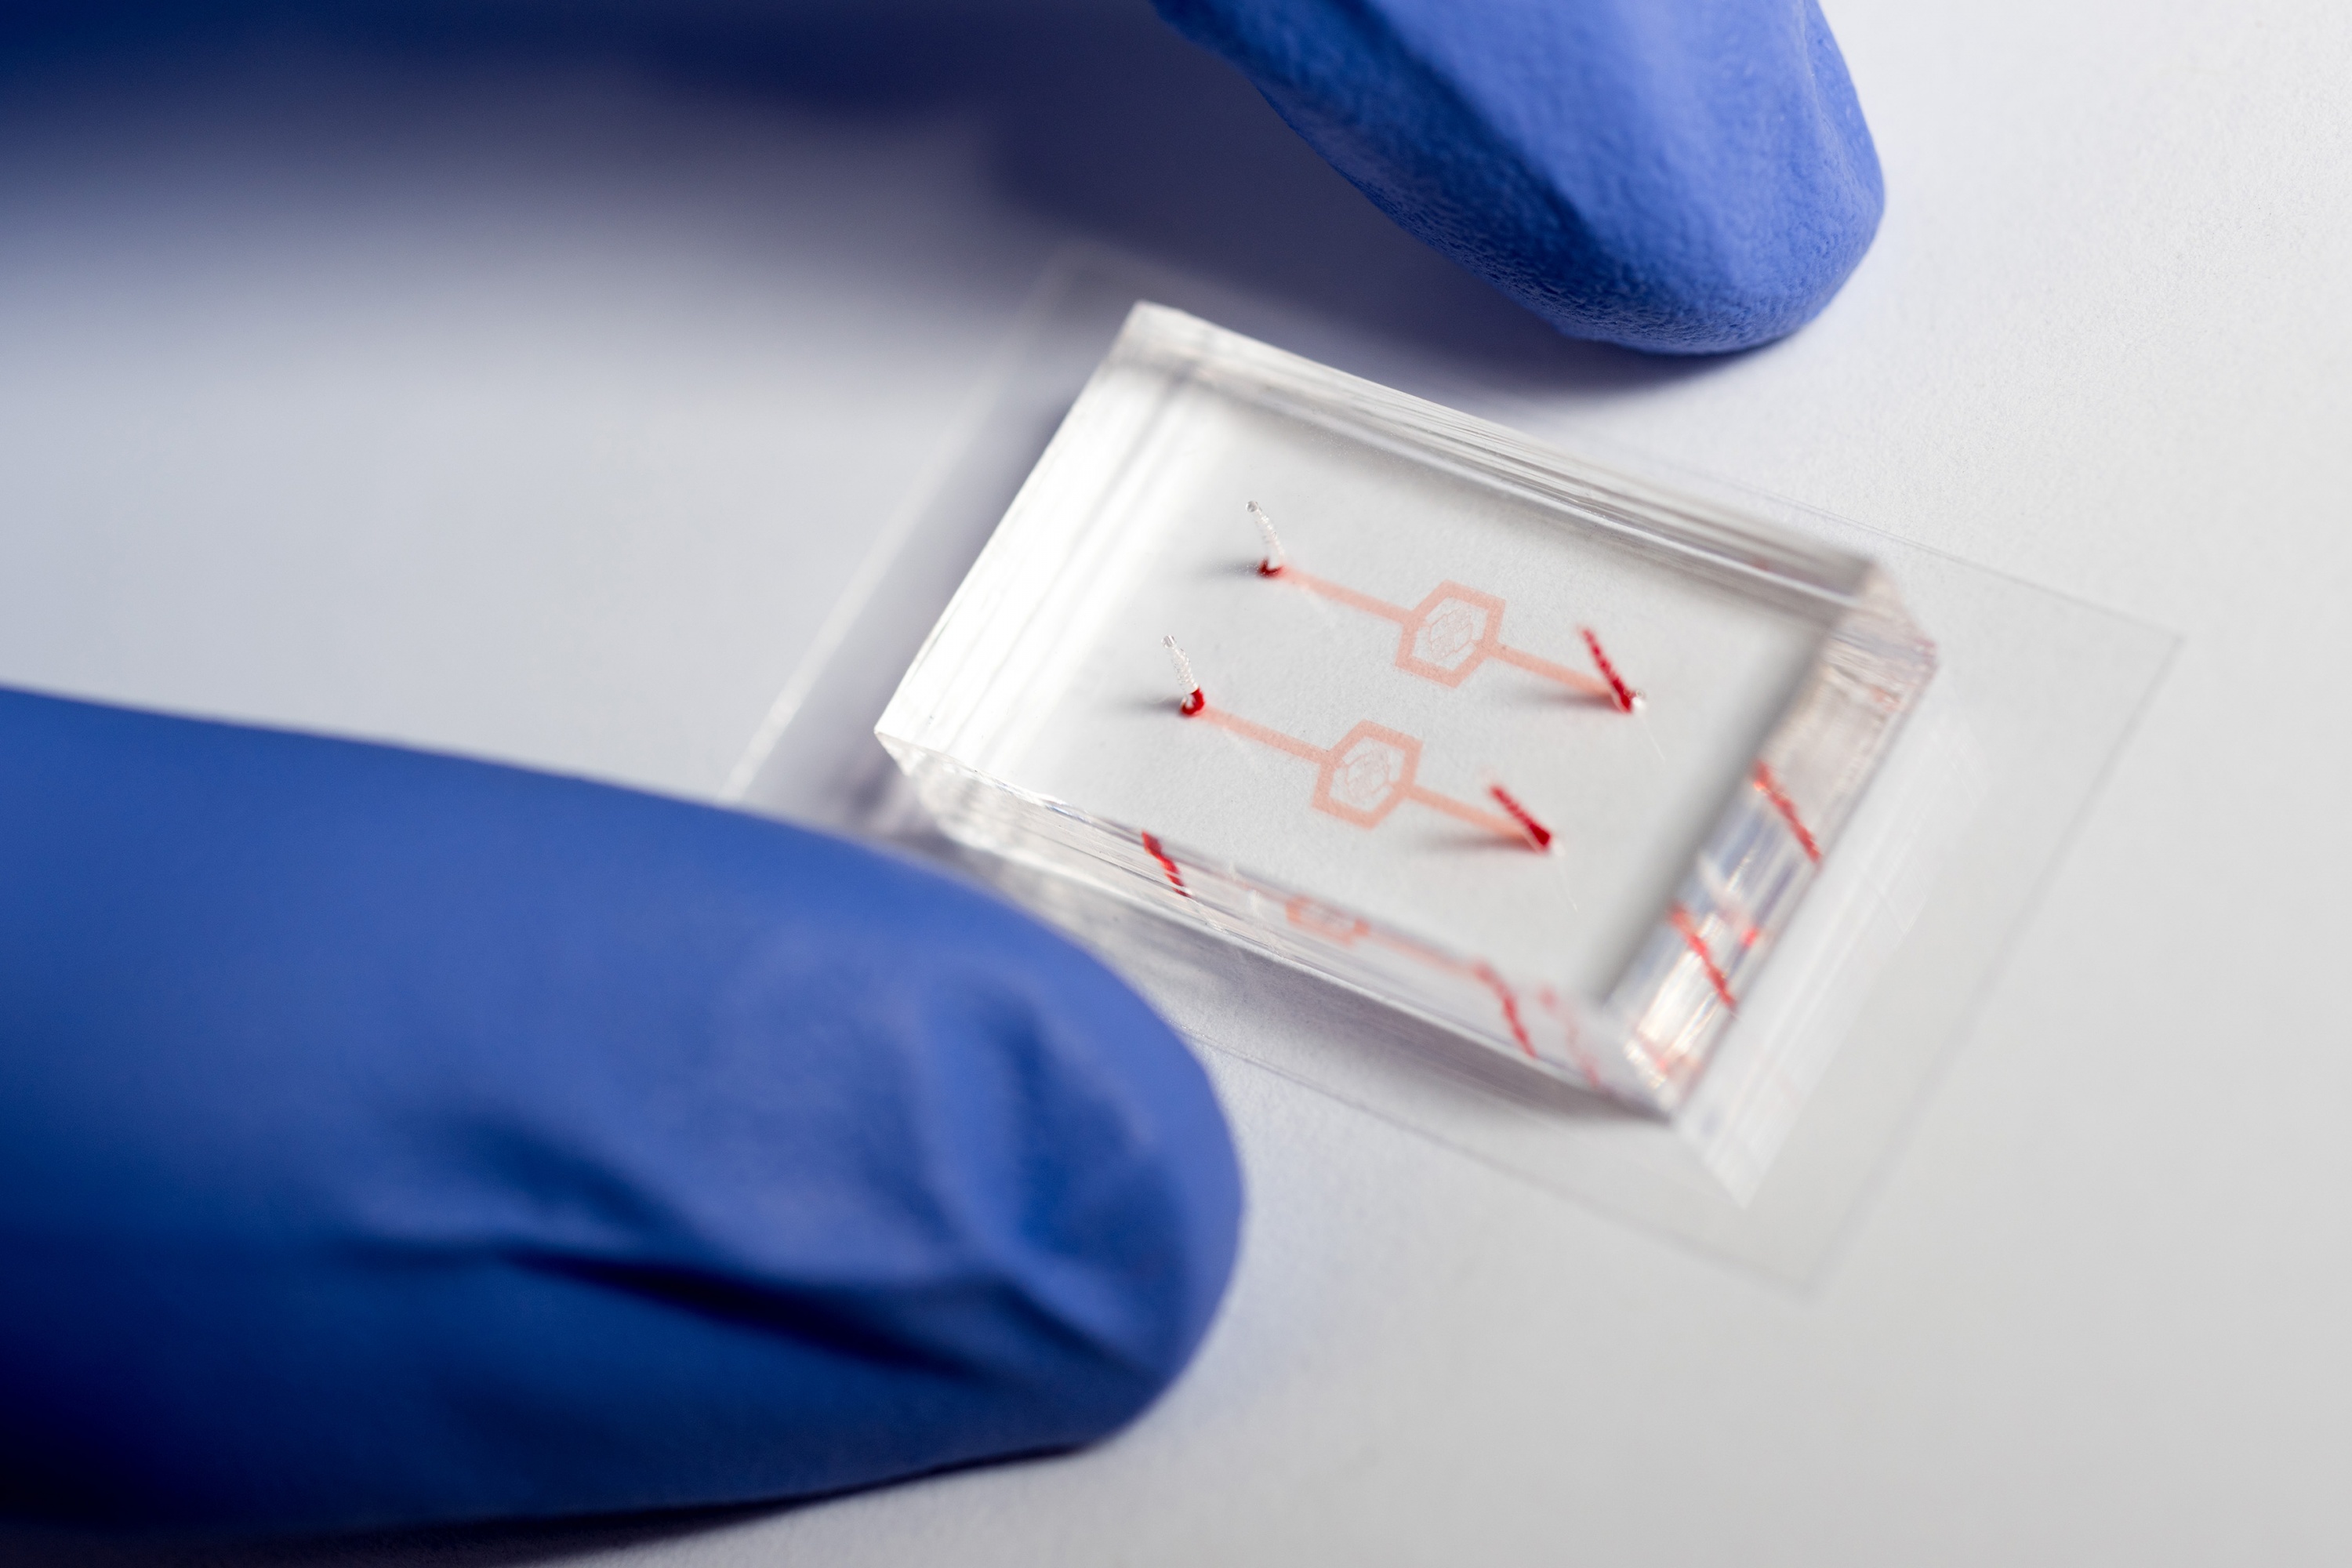 Researchers at Georgia Tech and Emory University fabricated model blood vessel systems that include artificial blood vessels with diameters as narrow as the smallest capillaries in the body. The systems were used to study the activity of white blood cells as they were affected by drugs that tend to make them softer, which facilitates their entry into blood circulation. (Credit: Rob Felt, Georgia Tech)